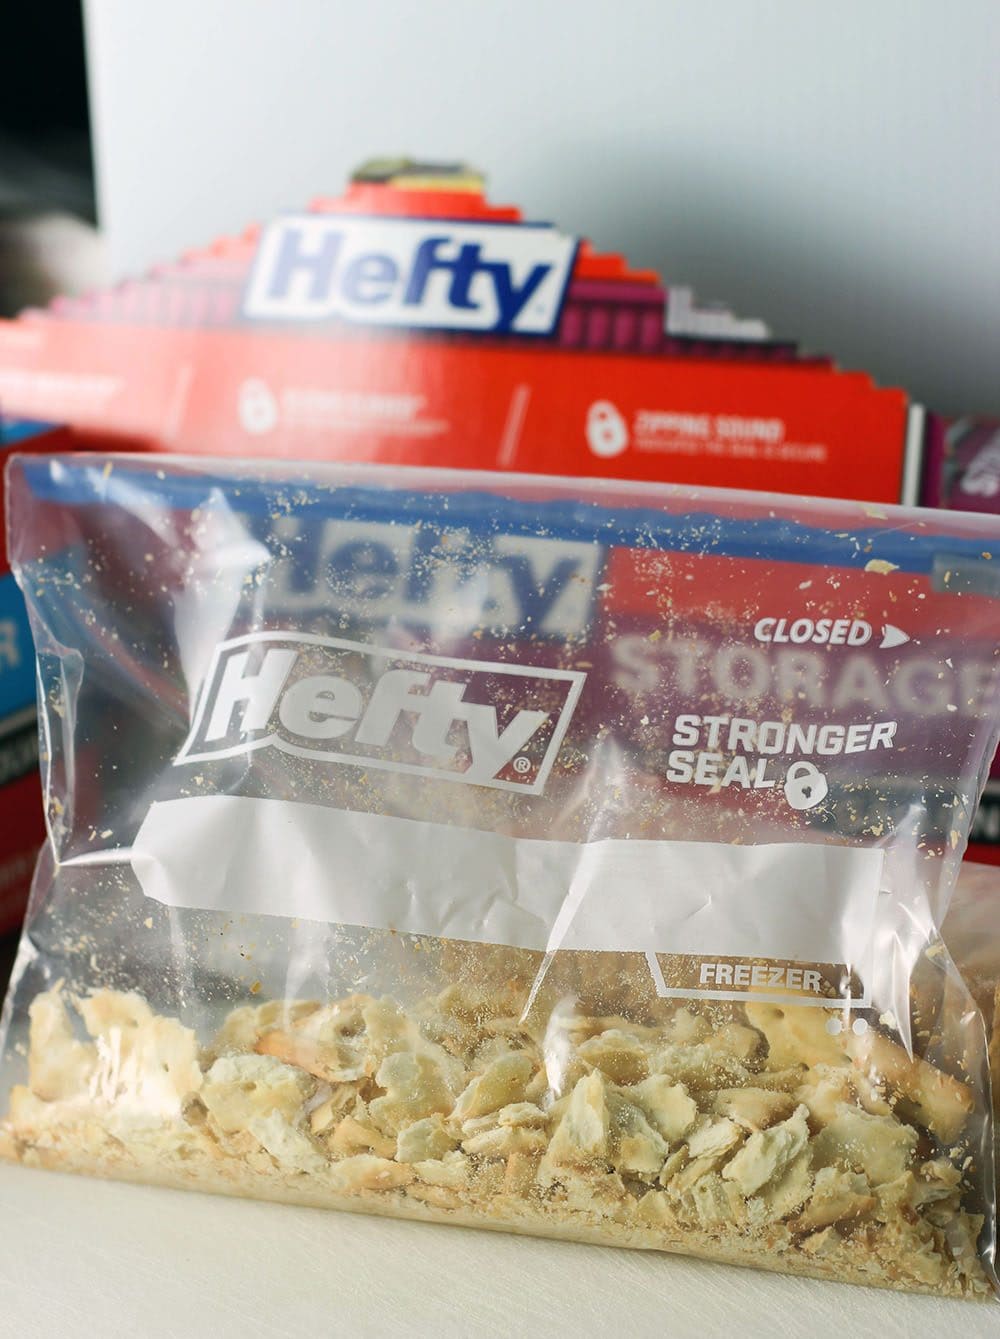 Hefty Slider bags are great for smashing crackers. They secure tightly with no spills.